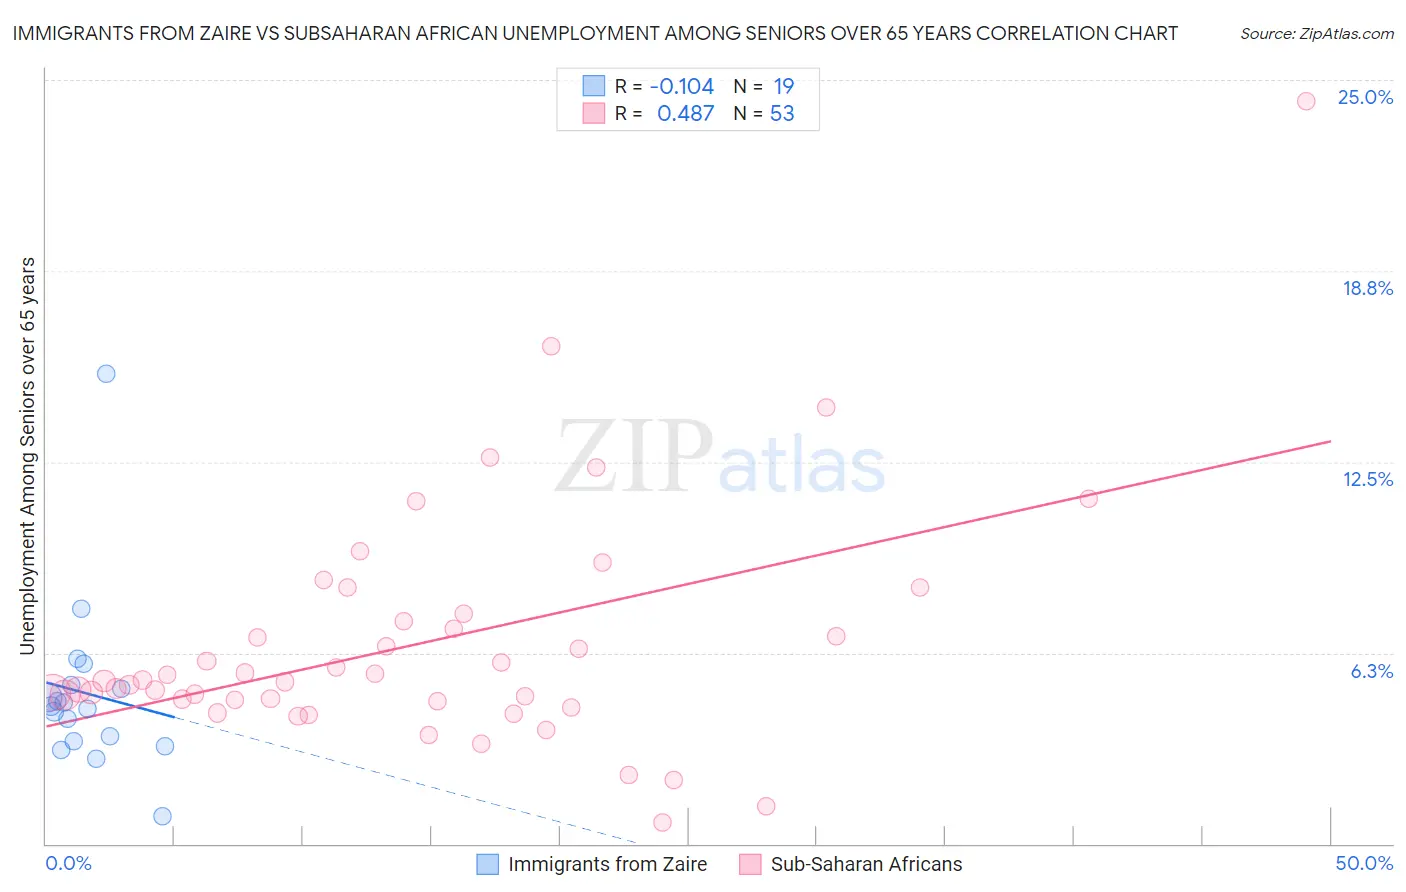 Immigrants from Zaire vs Subsaharan African Unemployment Among Seniors over 65 years